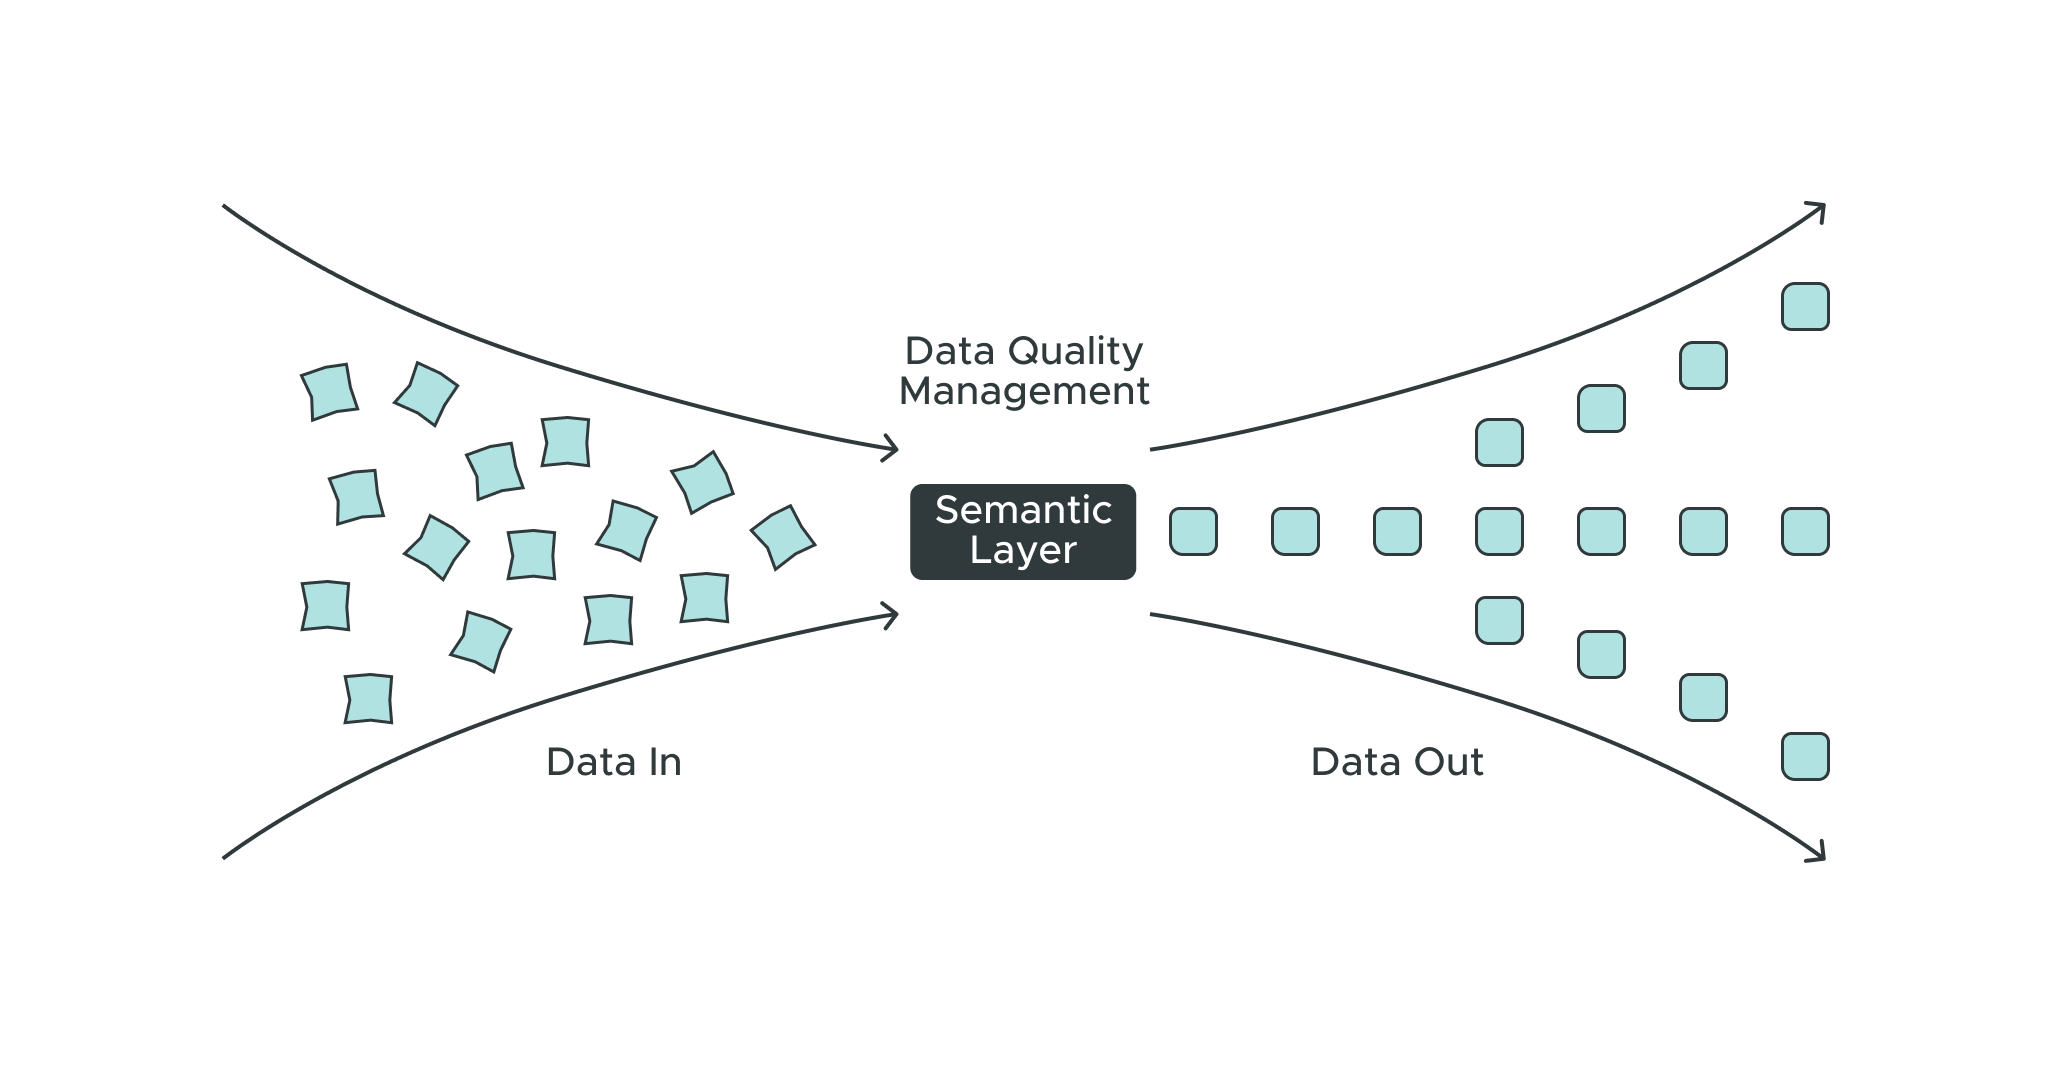 How To Improve Data Quality Using a Semantic Layer